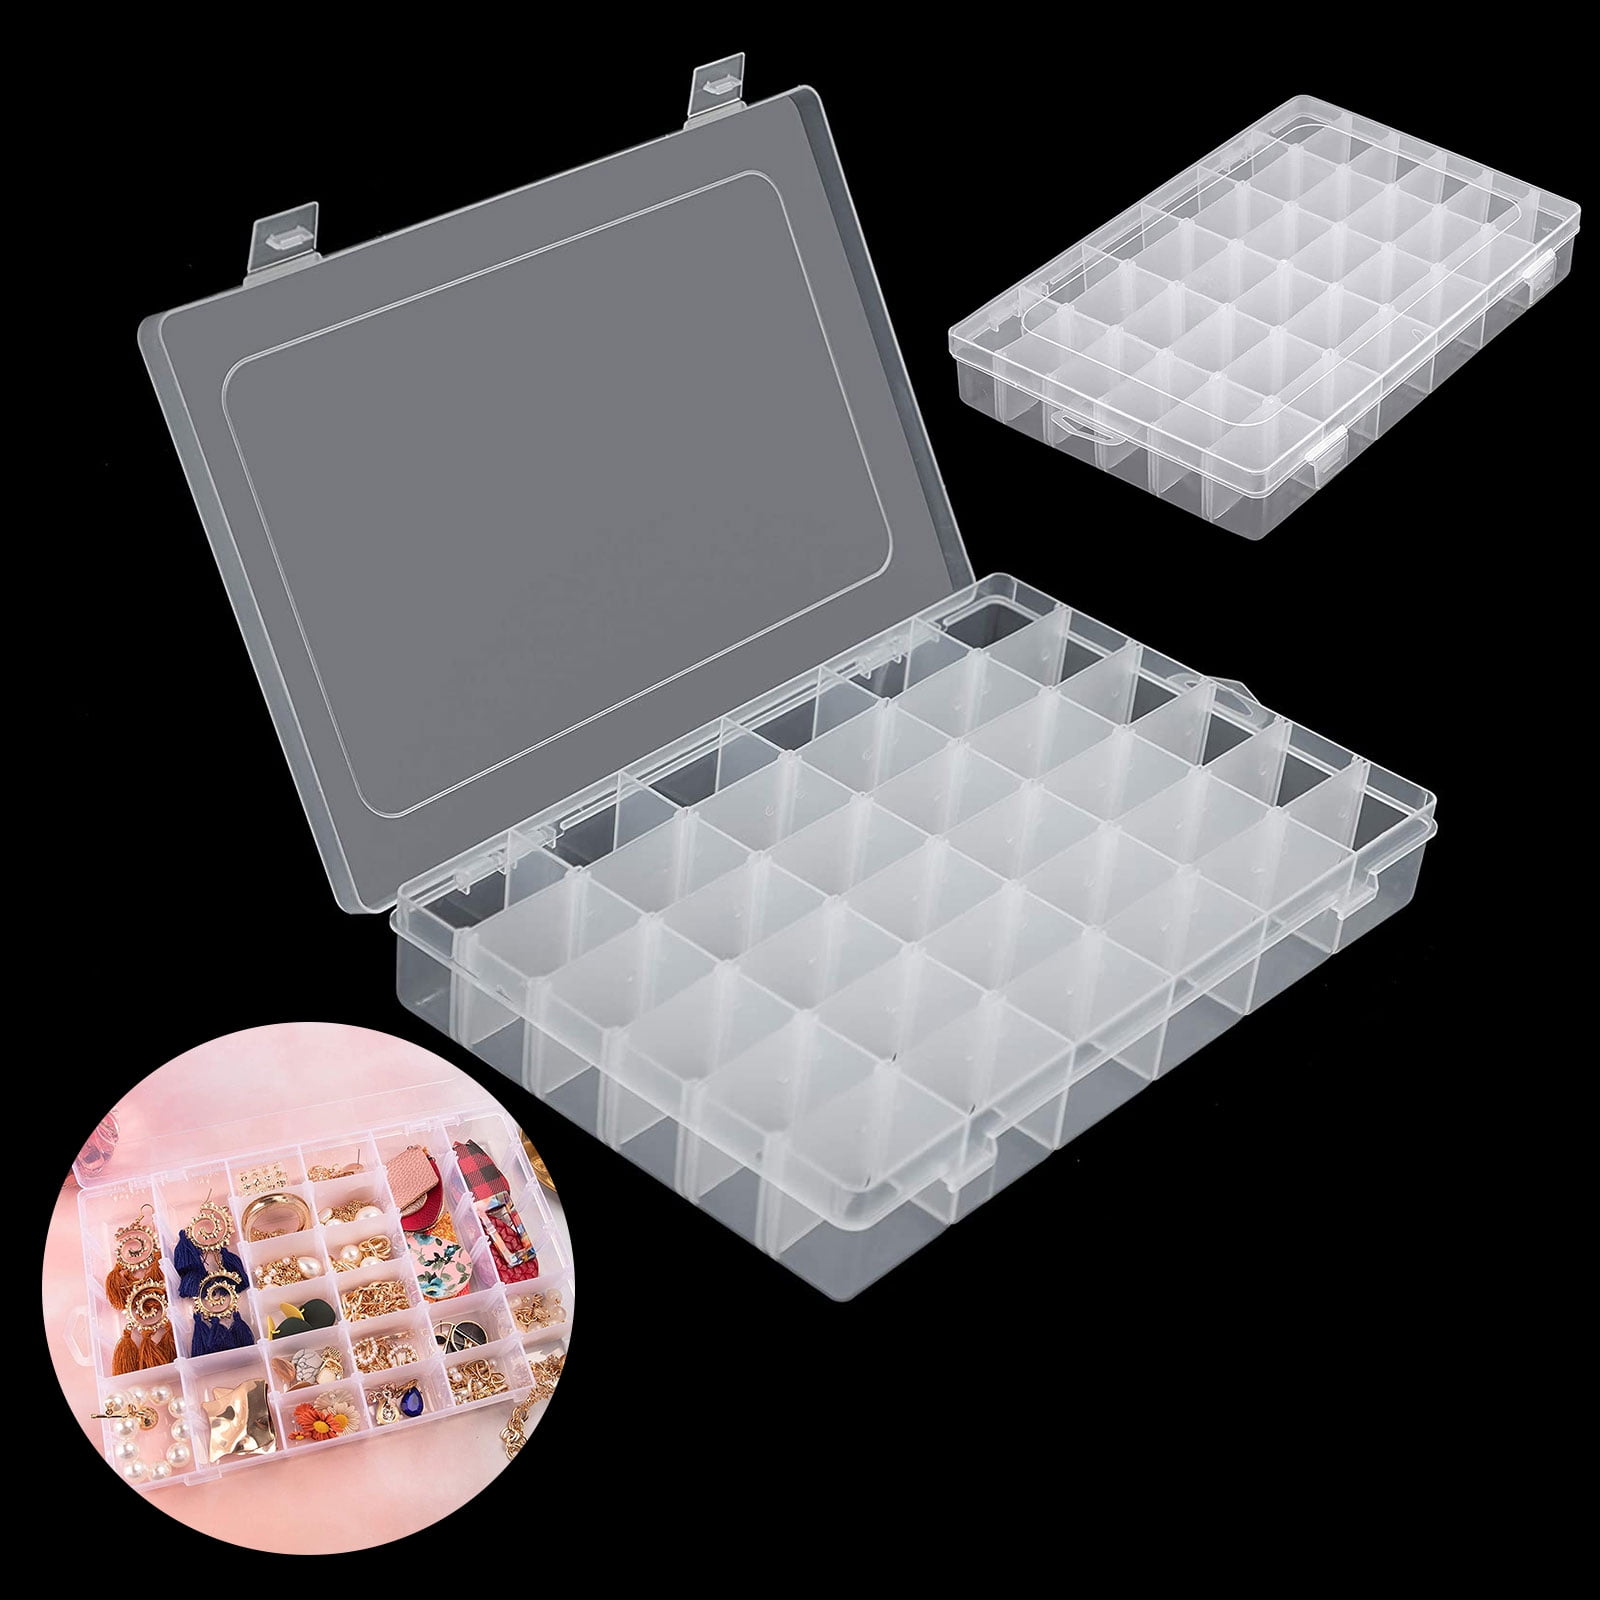 Szsrcywd 36 Grids Clear Plastic Jewelry Box Organizer Storage Container with Adjustable Dividers 